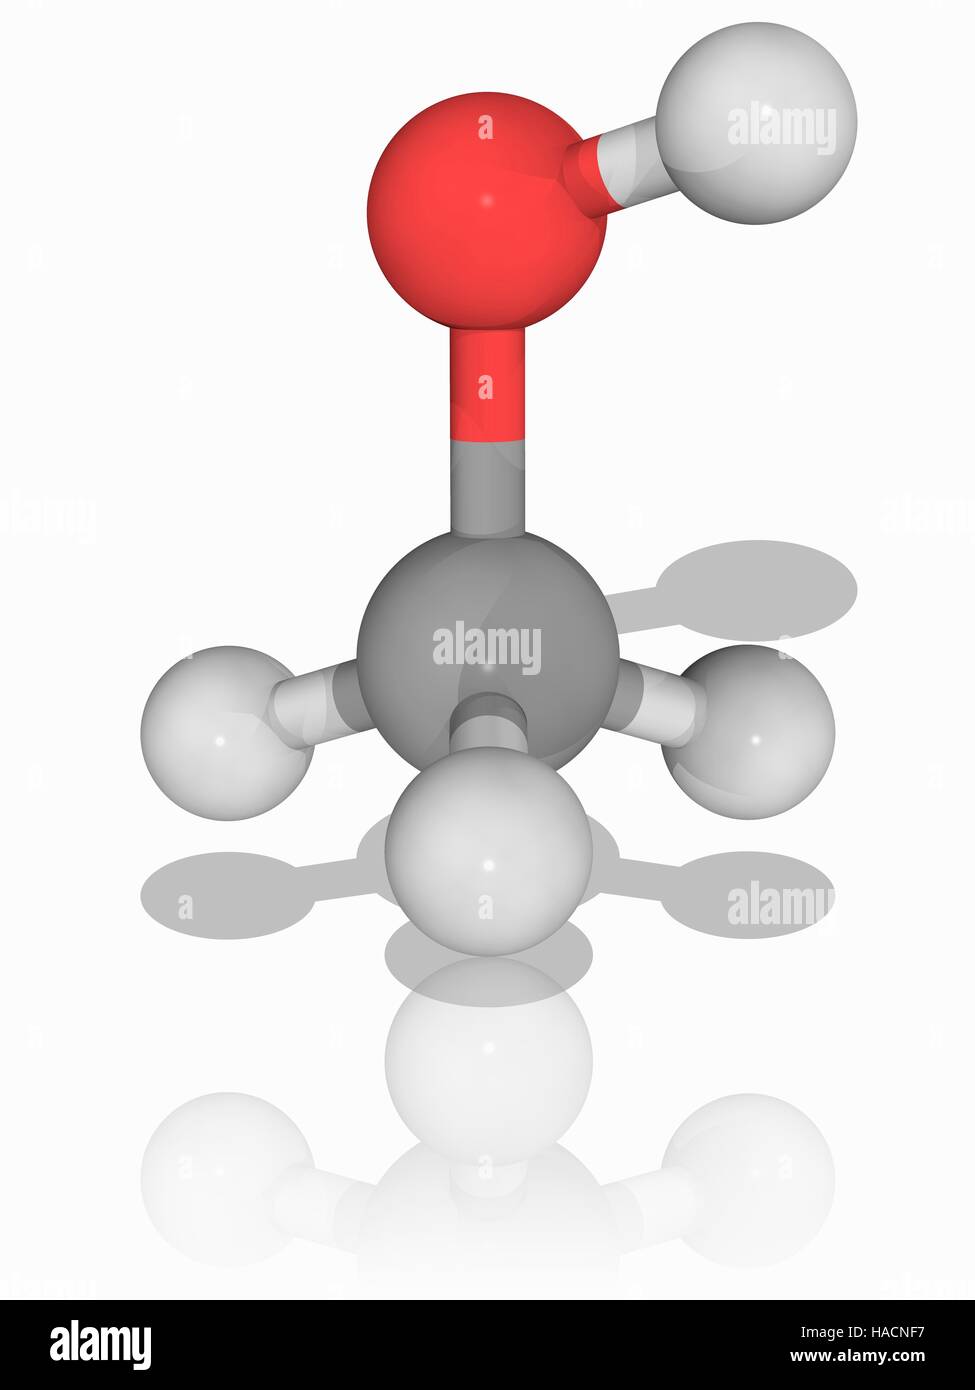 Methanol. Molecular model of the organic compound and alcohol methanol (C.H4.O), also known as methyl alcohol. This compound is a light, volatile colourless and flammable liquid. It is used as an antifreeze, solvent, fuel and as a denaturant for ethanol (added to make the ethanol unfit for human consumption). Atoms are represented as spheres and are colour-coded: carbon (grey), hydrogen (white) and oxygen (red). Illustration. Stock Photo